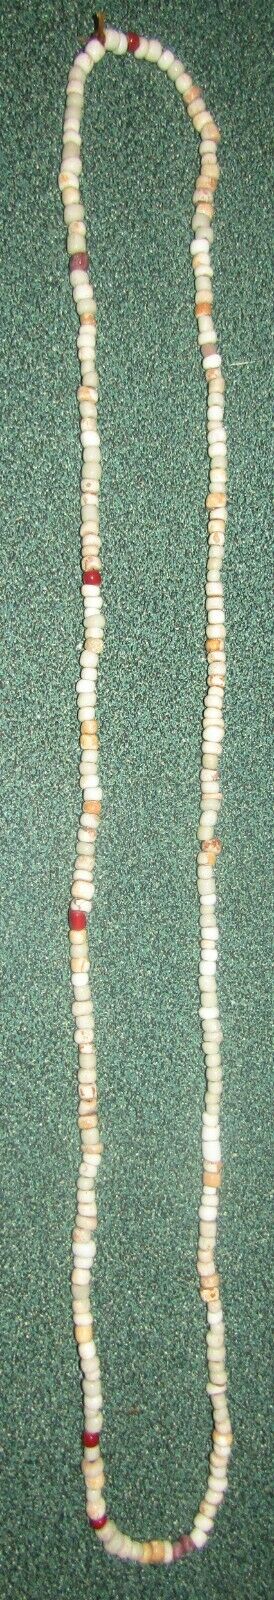 Indian Artifacts 242 Glass Trade Bead Necklaces Colusa, Cty California